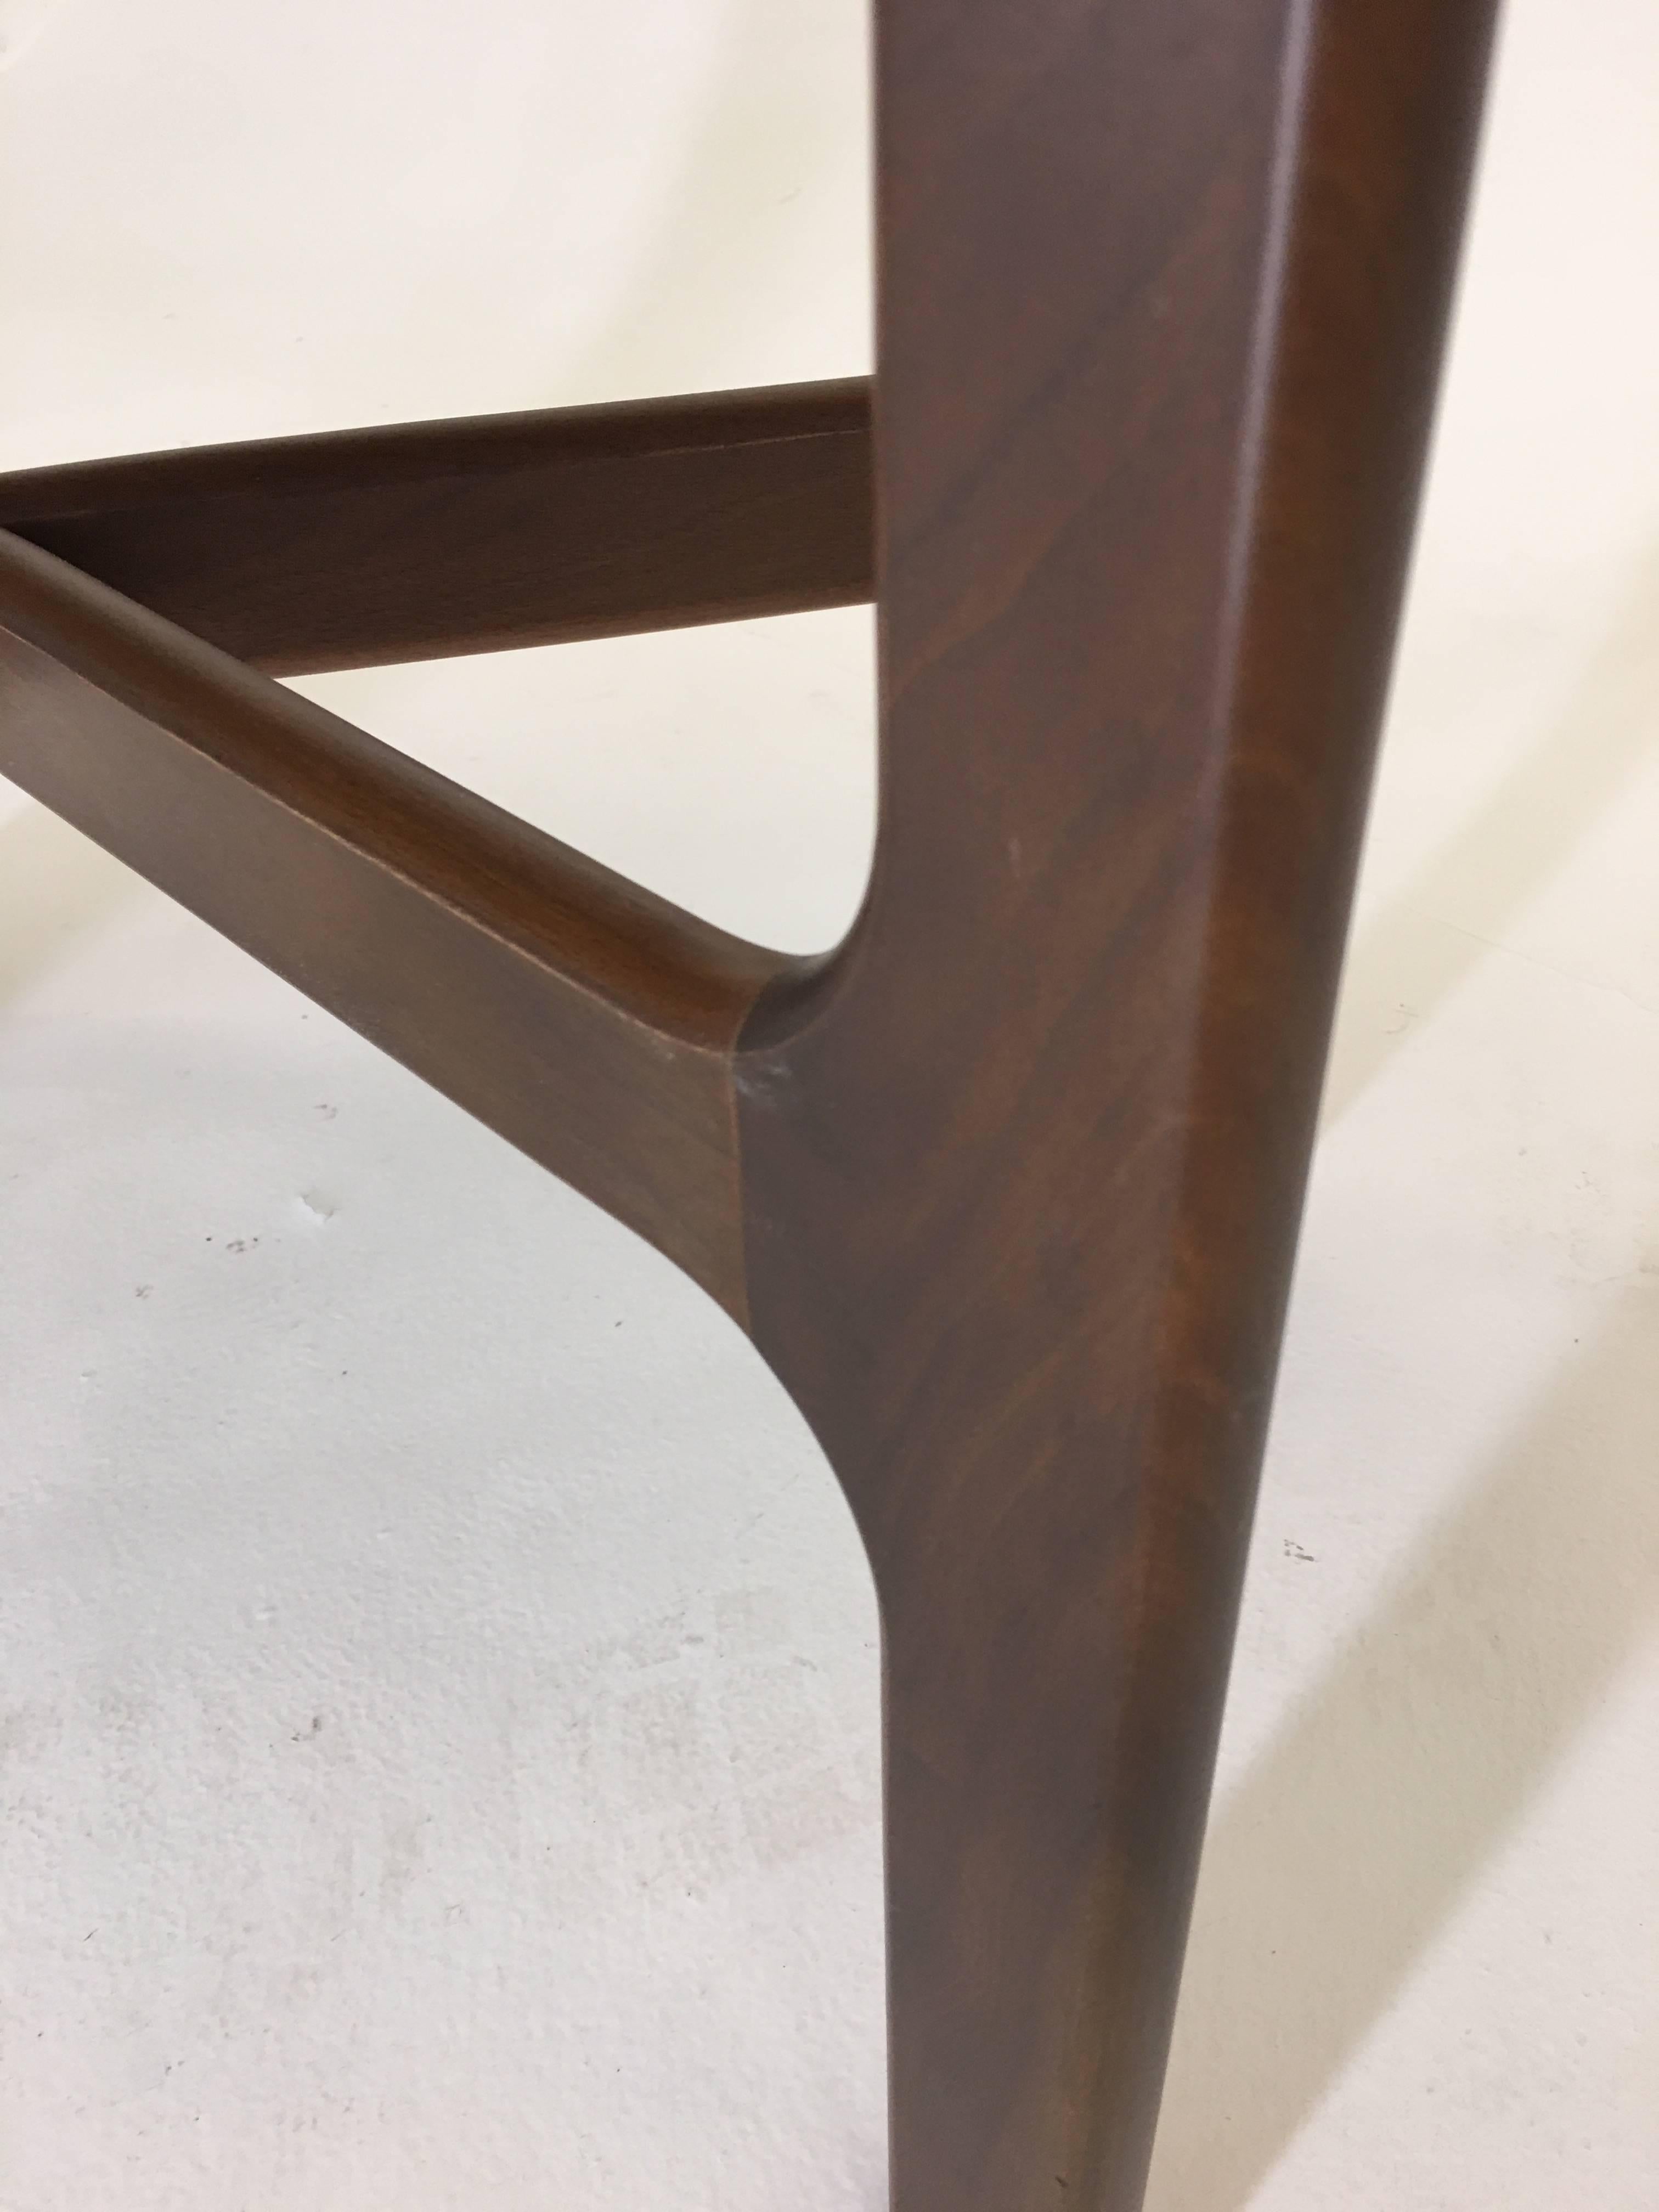 Unsigned though likely the work of Dunbar or Selig, this occasional table stands out from the rest through the fine use of walnut and black lacquer in a classic Danish Modern style. The black surface of the top being framed with walnut gives the